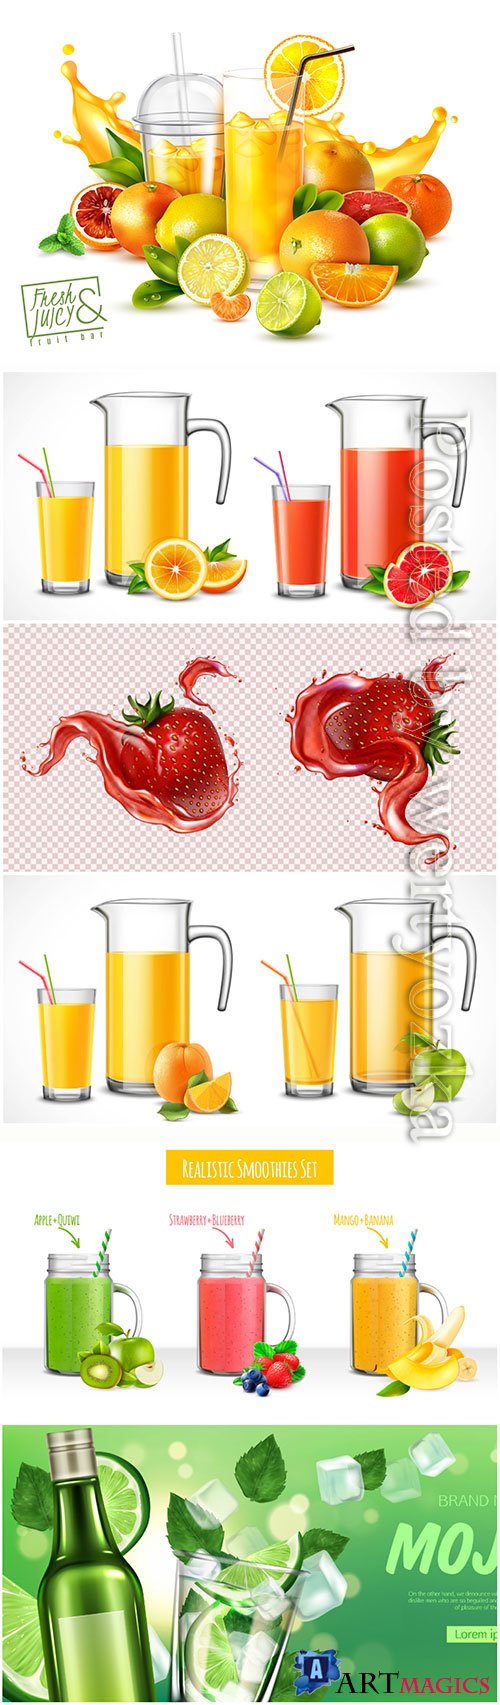 Fruits, fresh juices and drinks vector illustration